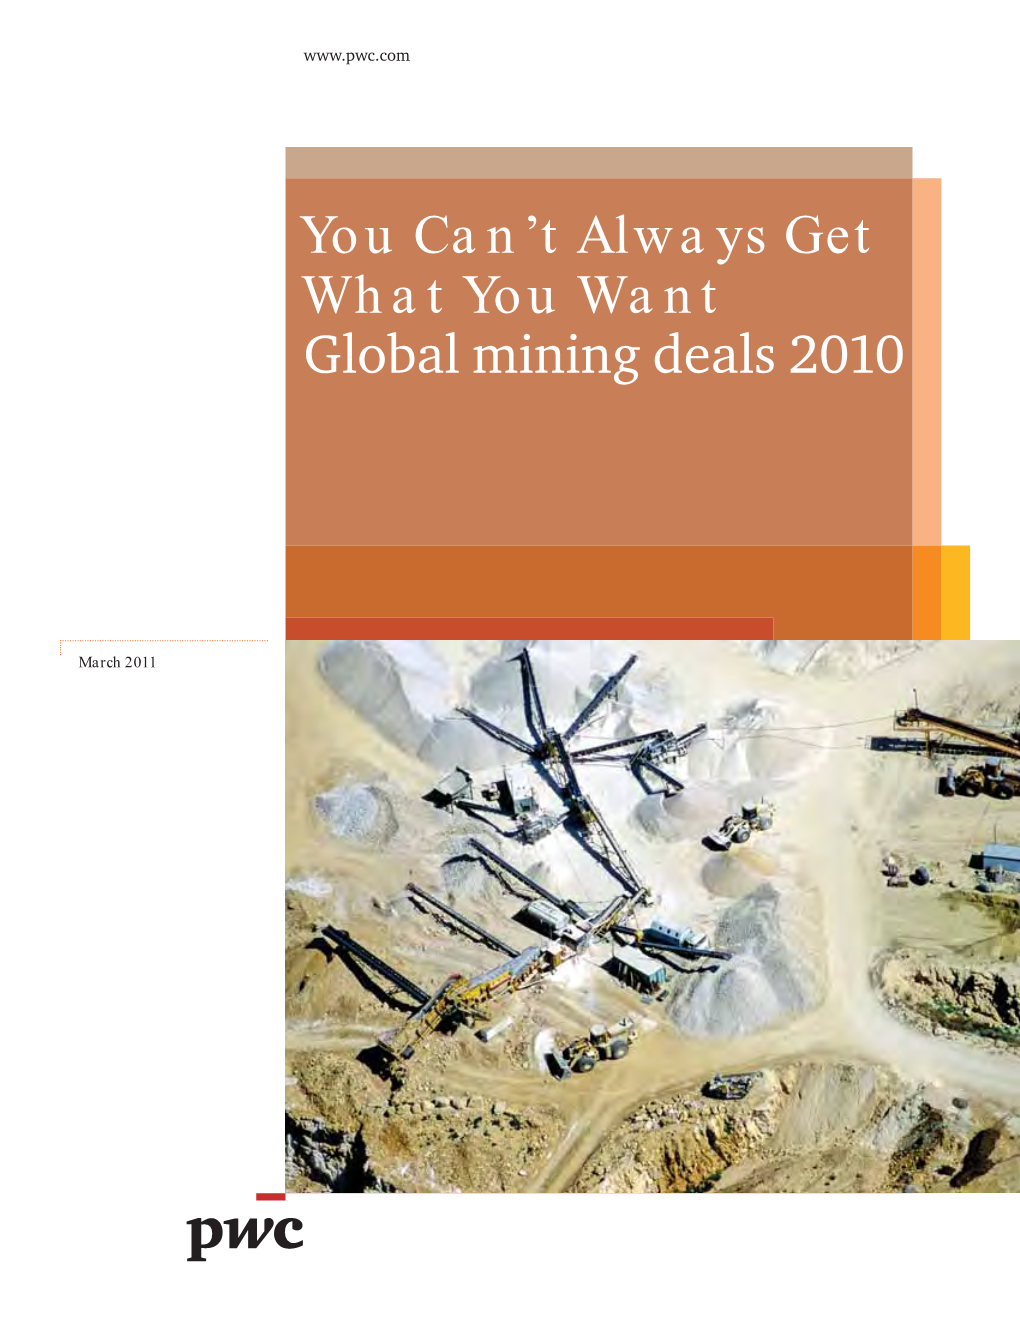 You Can't Always Get What You Want Global Mining Deals 2010